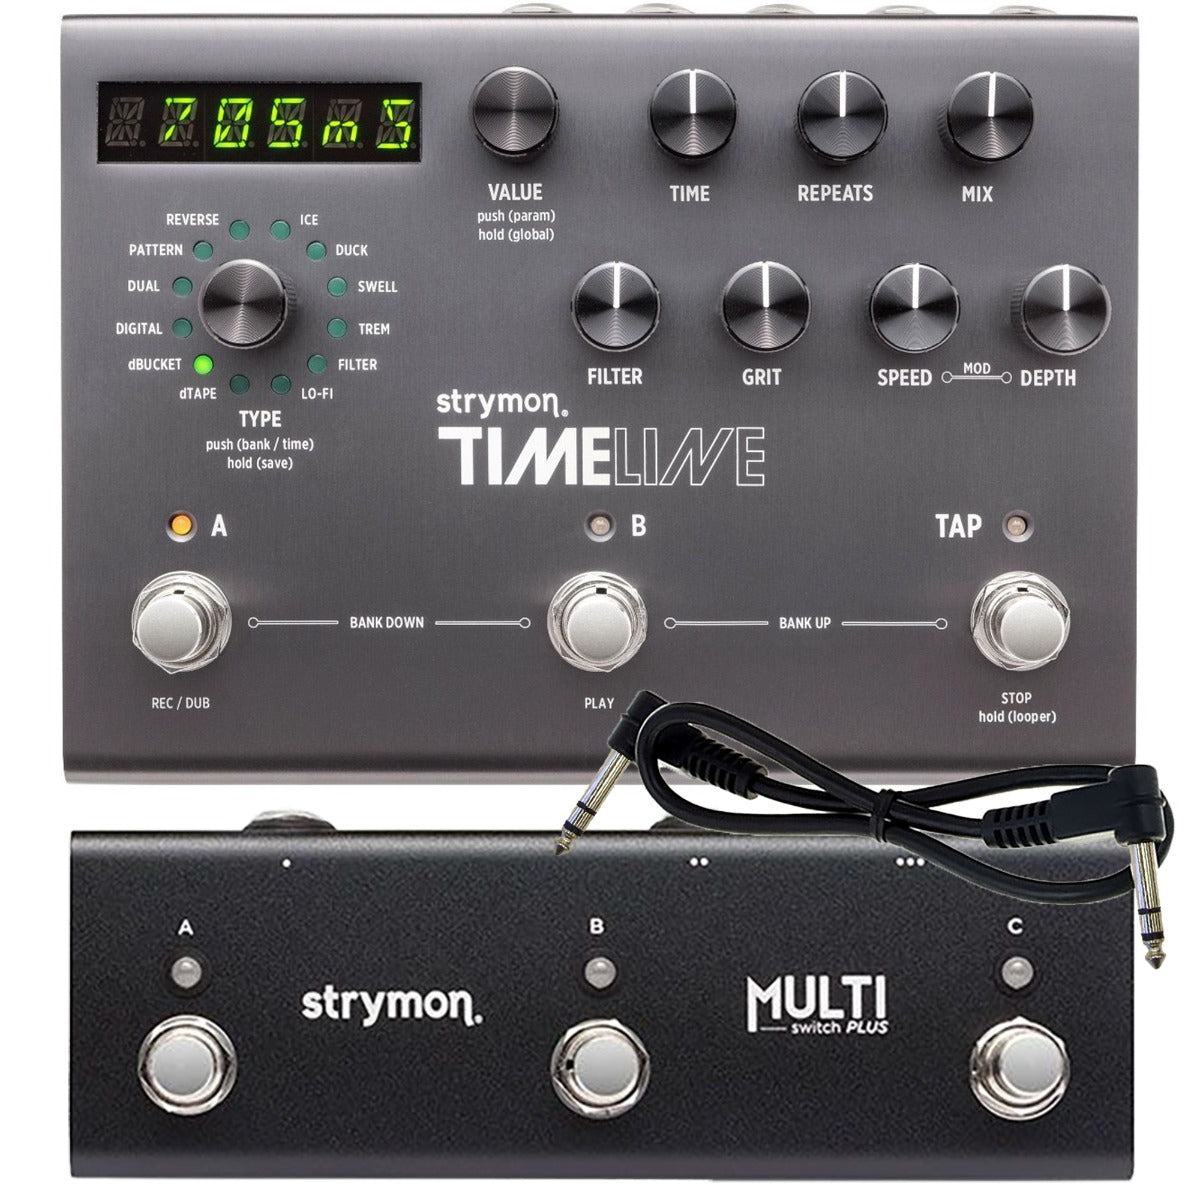 Collage of the components in the Strymon Timeline Multidimensional Delay Pedal with Multiswitch Plus BUNDLE